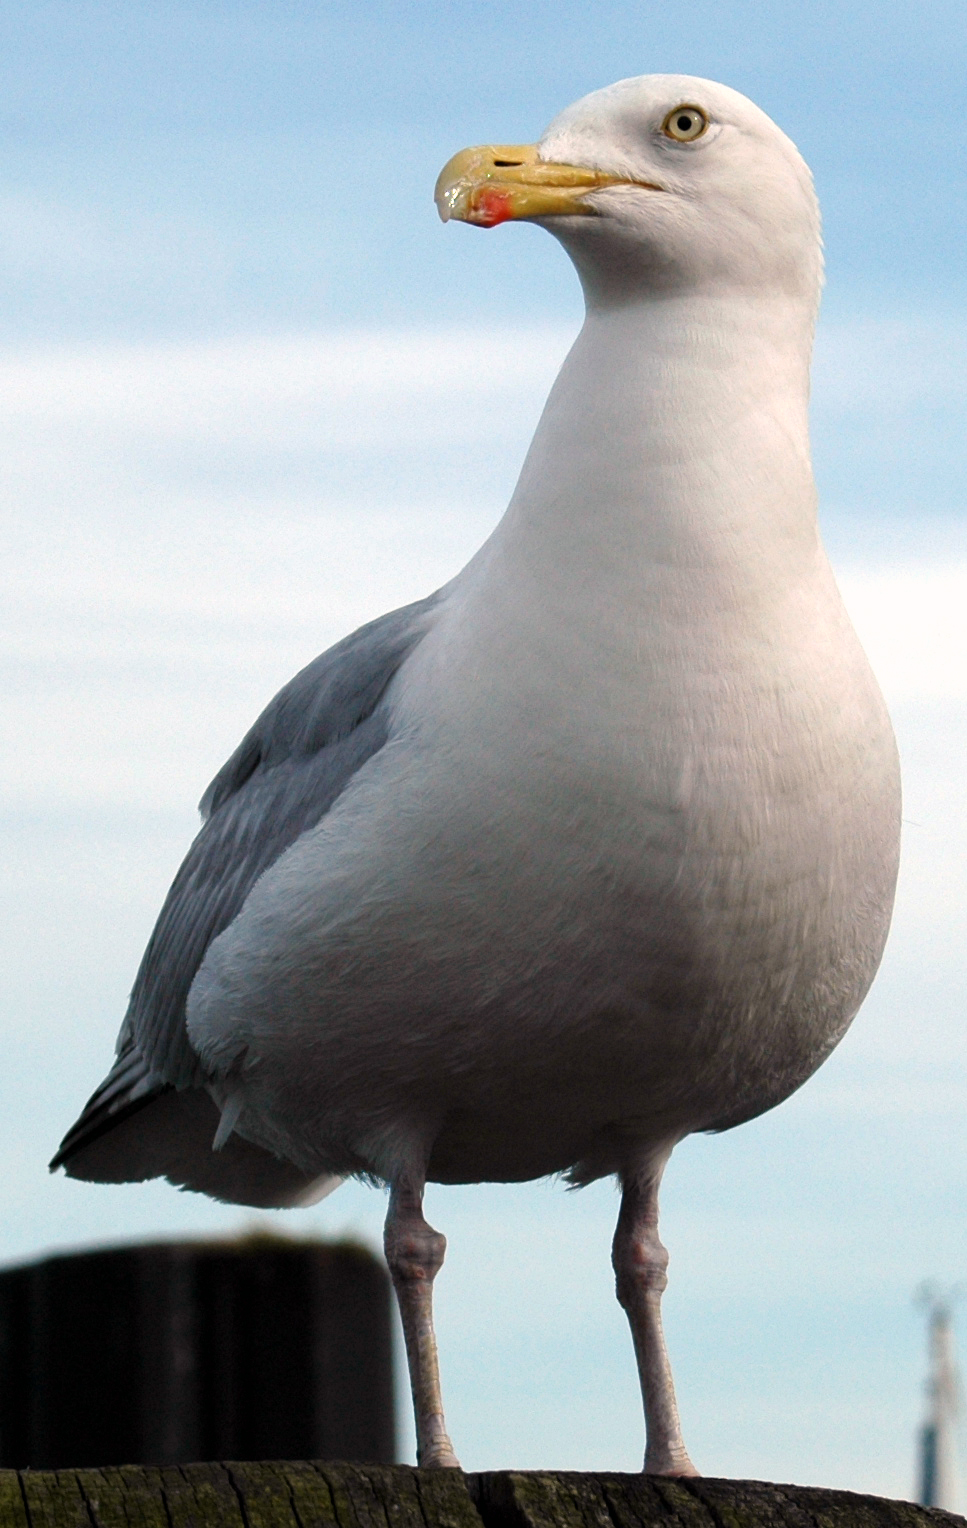 a white seagull sitting on a wooden dock